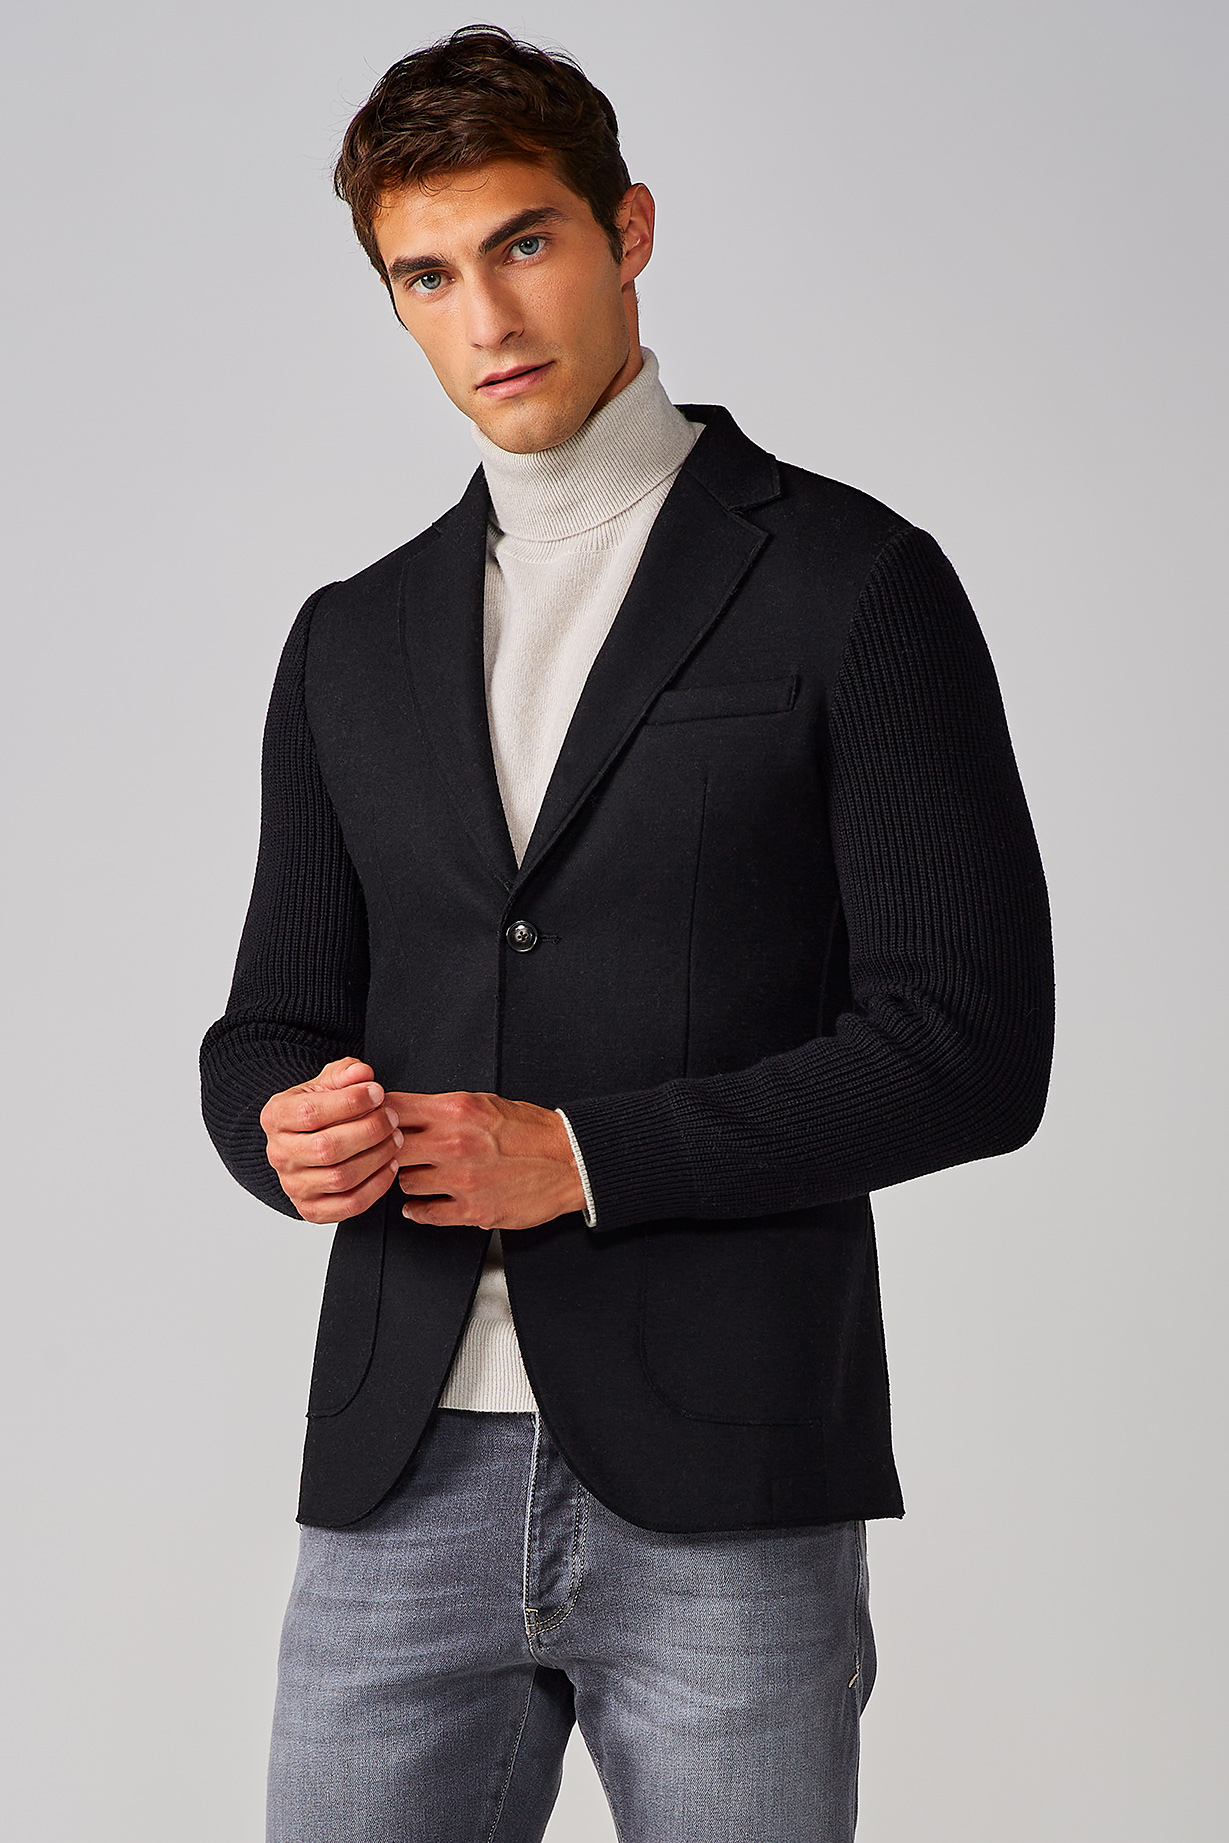 BLACK JACKET WITH KNITTED SLEEVES